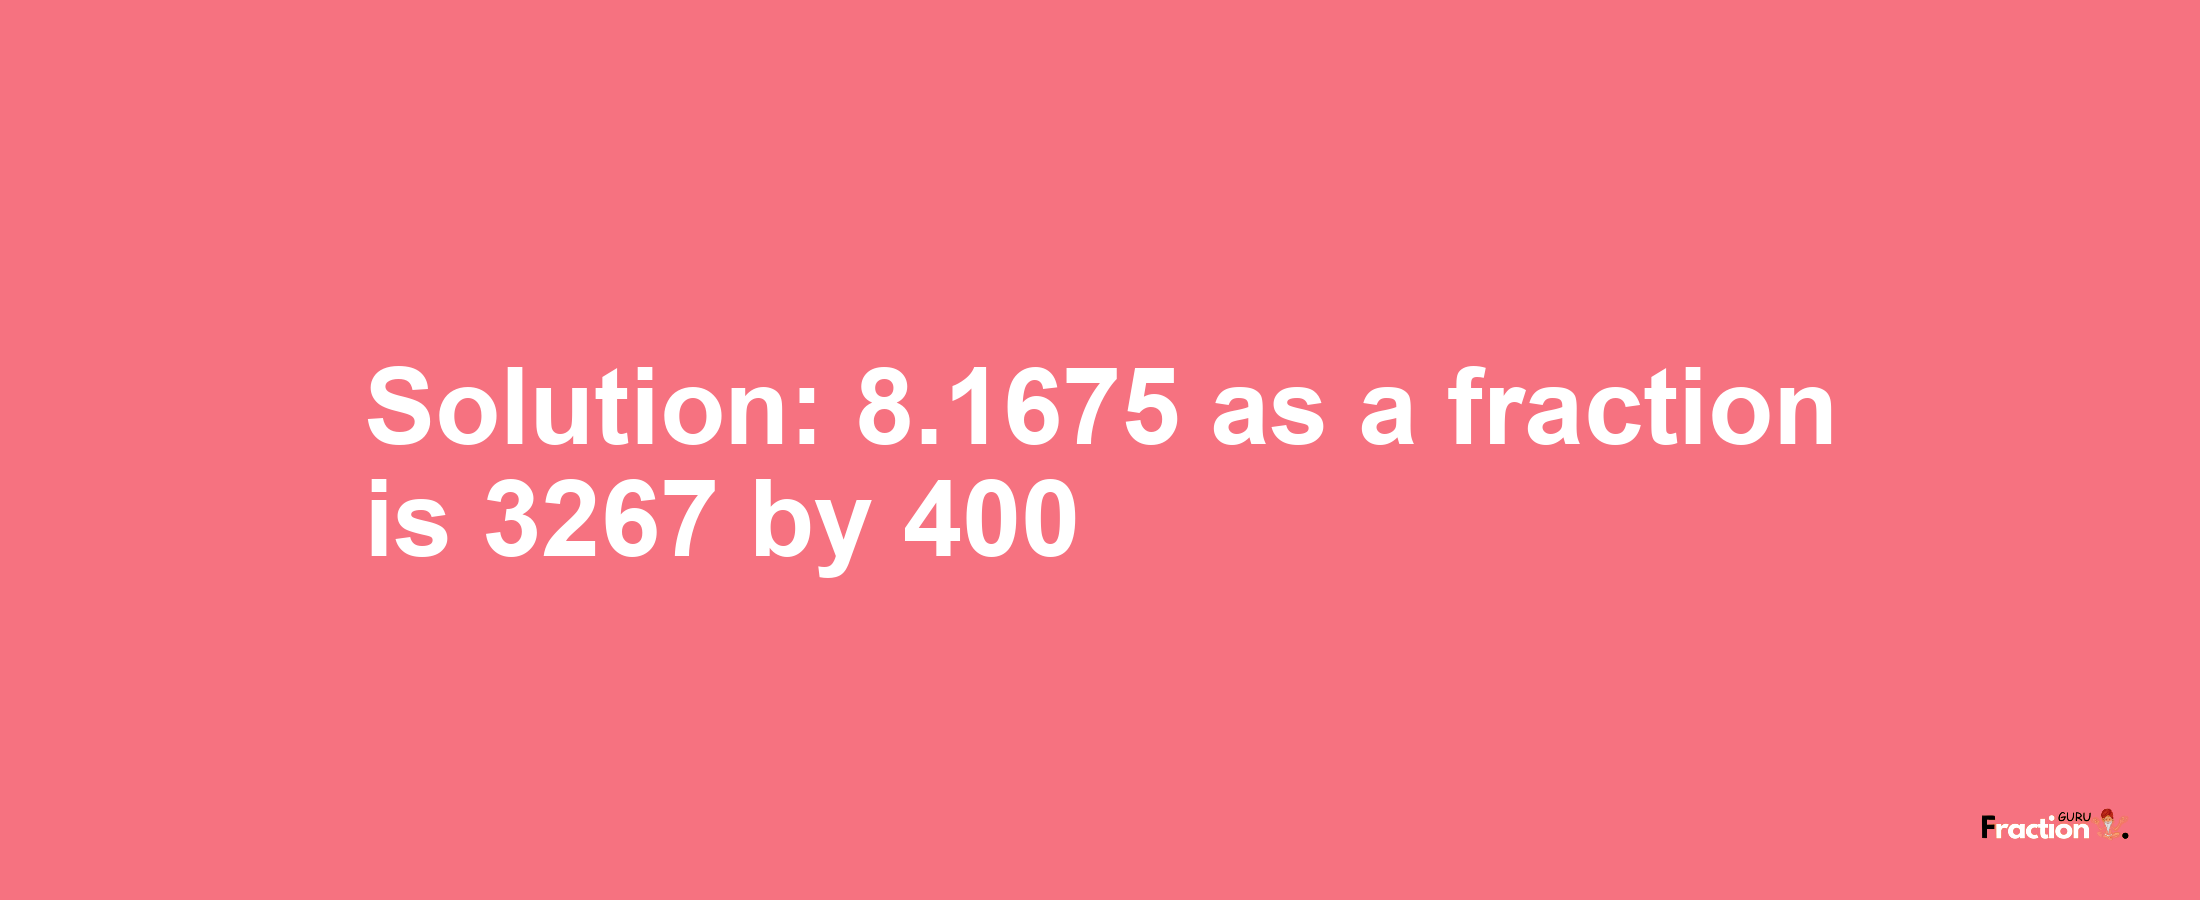 Solution:8.1675 as a fraction is 3267/400